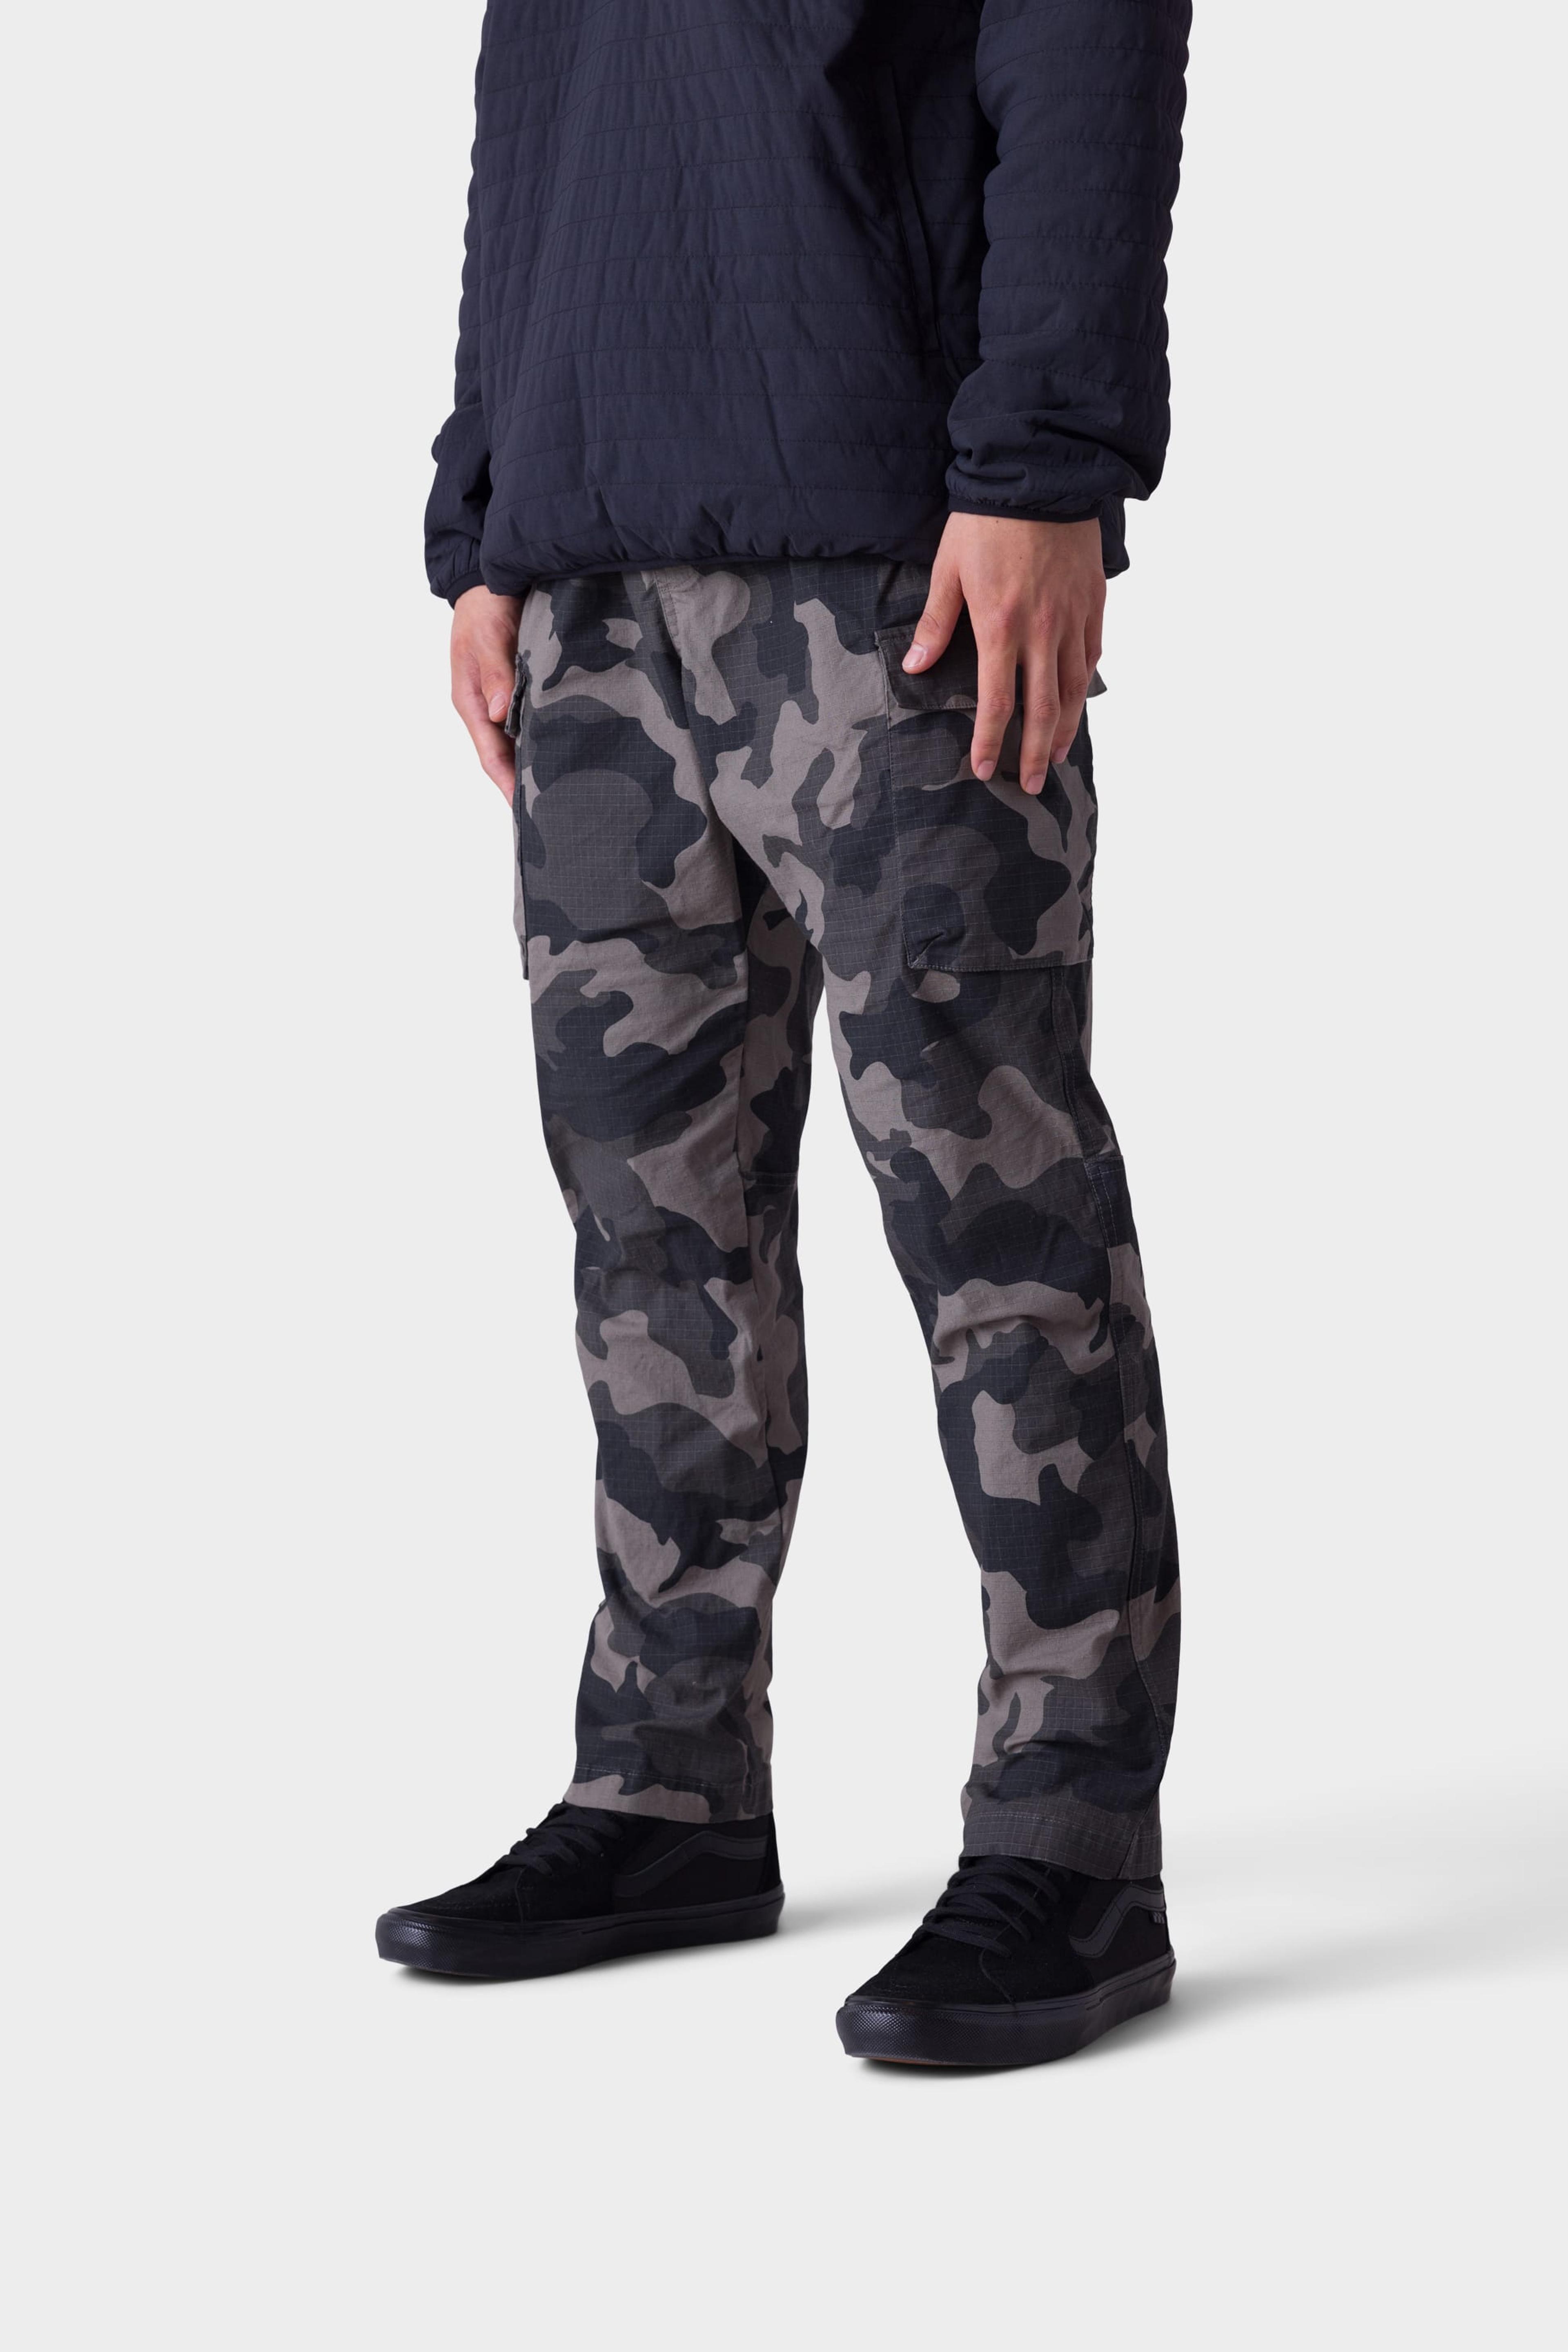 686 Men's All Time Cargo Pant - Wide Tapered Fit